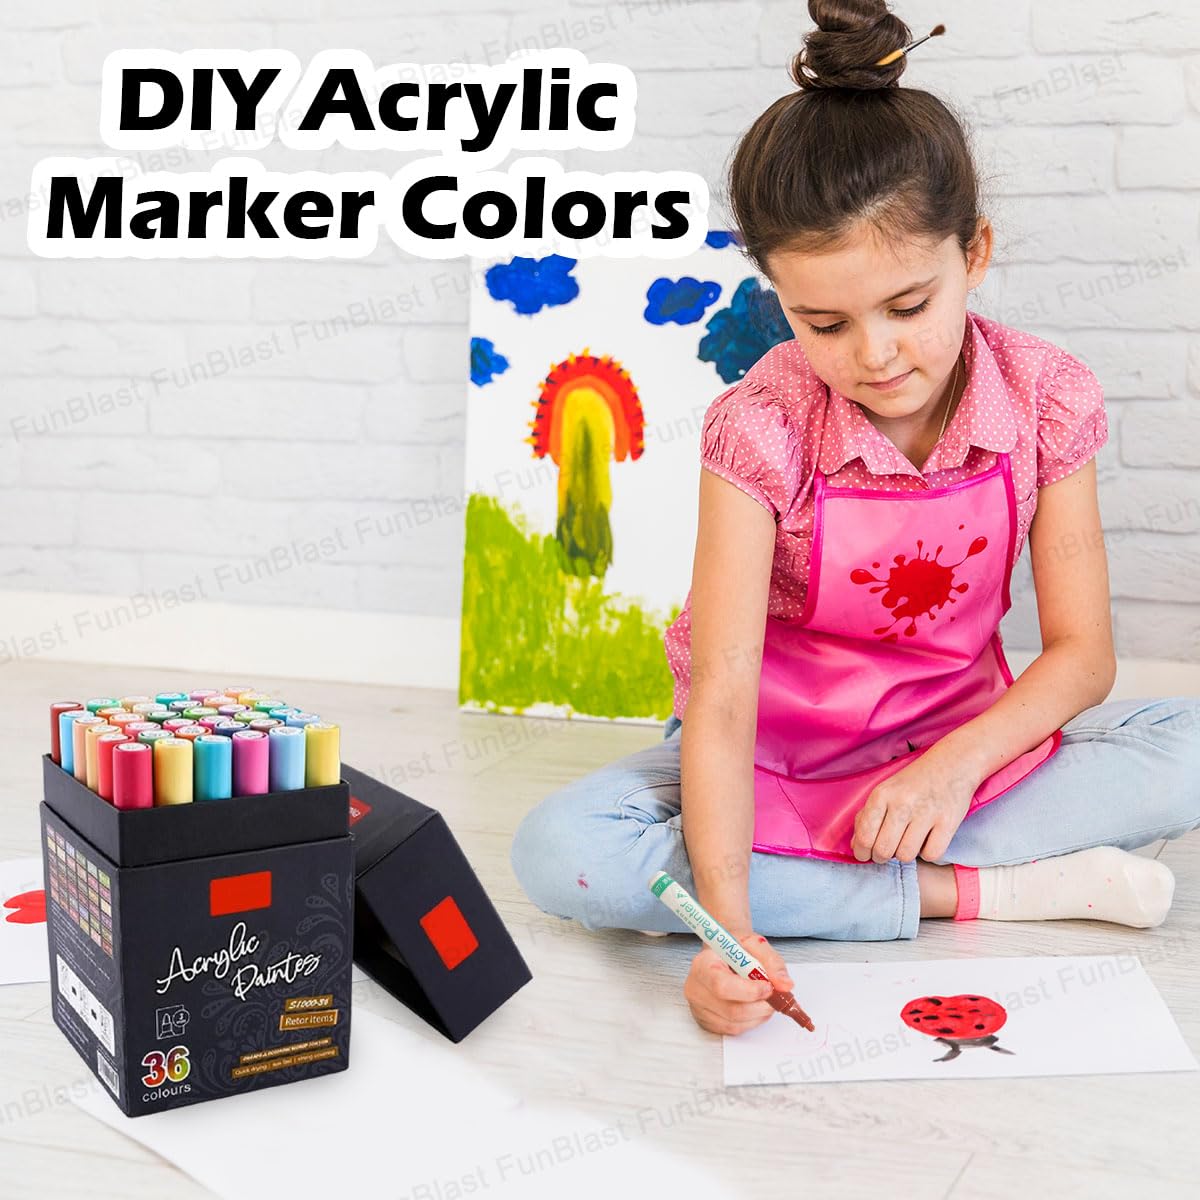 Like It Touch Cool Alcohol Professional Art Markers Set at Rs 1200/box, Color Marker in Delhi